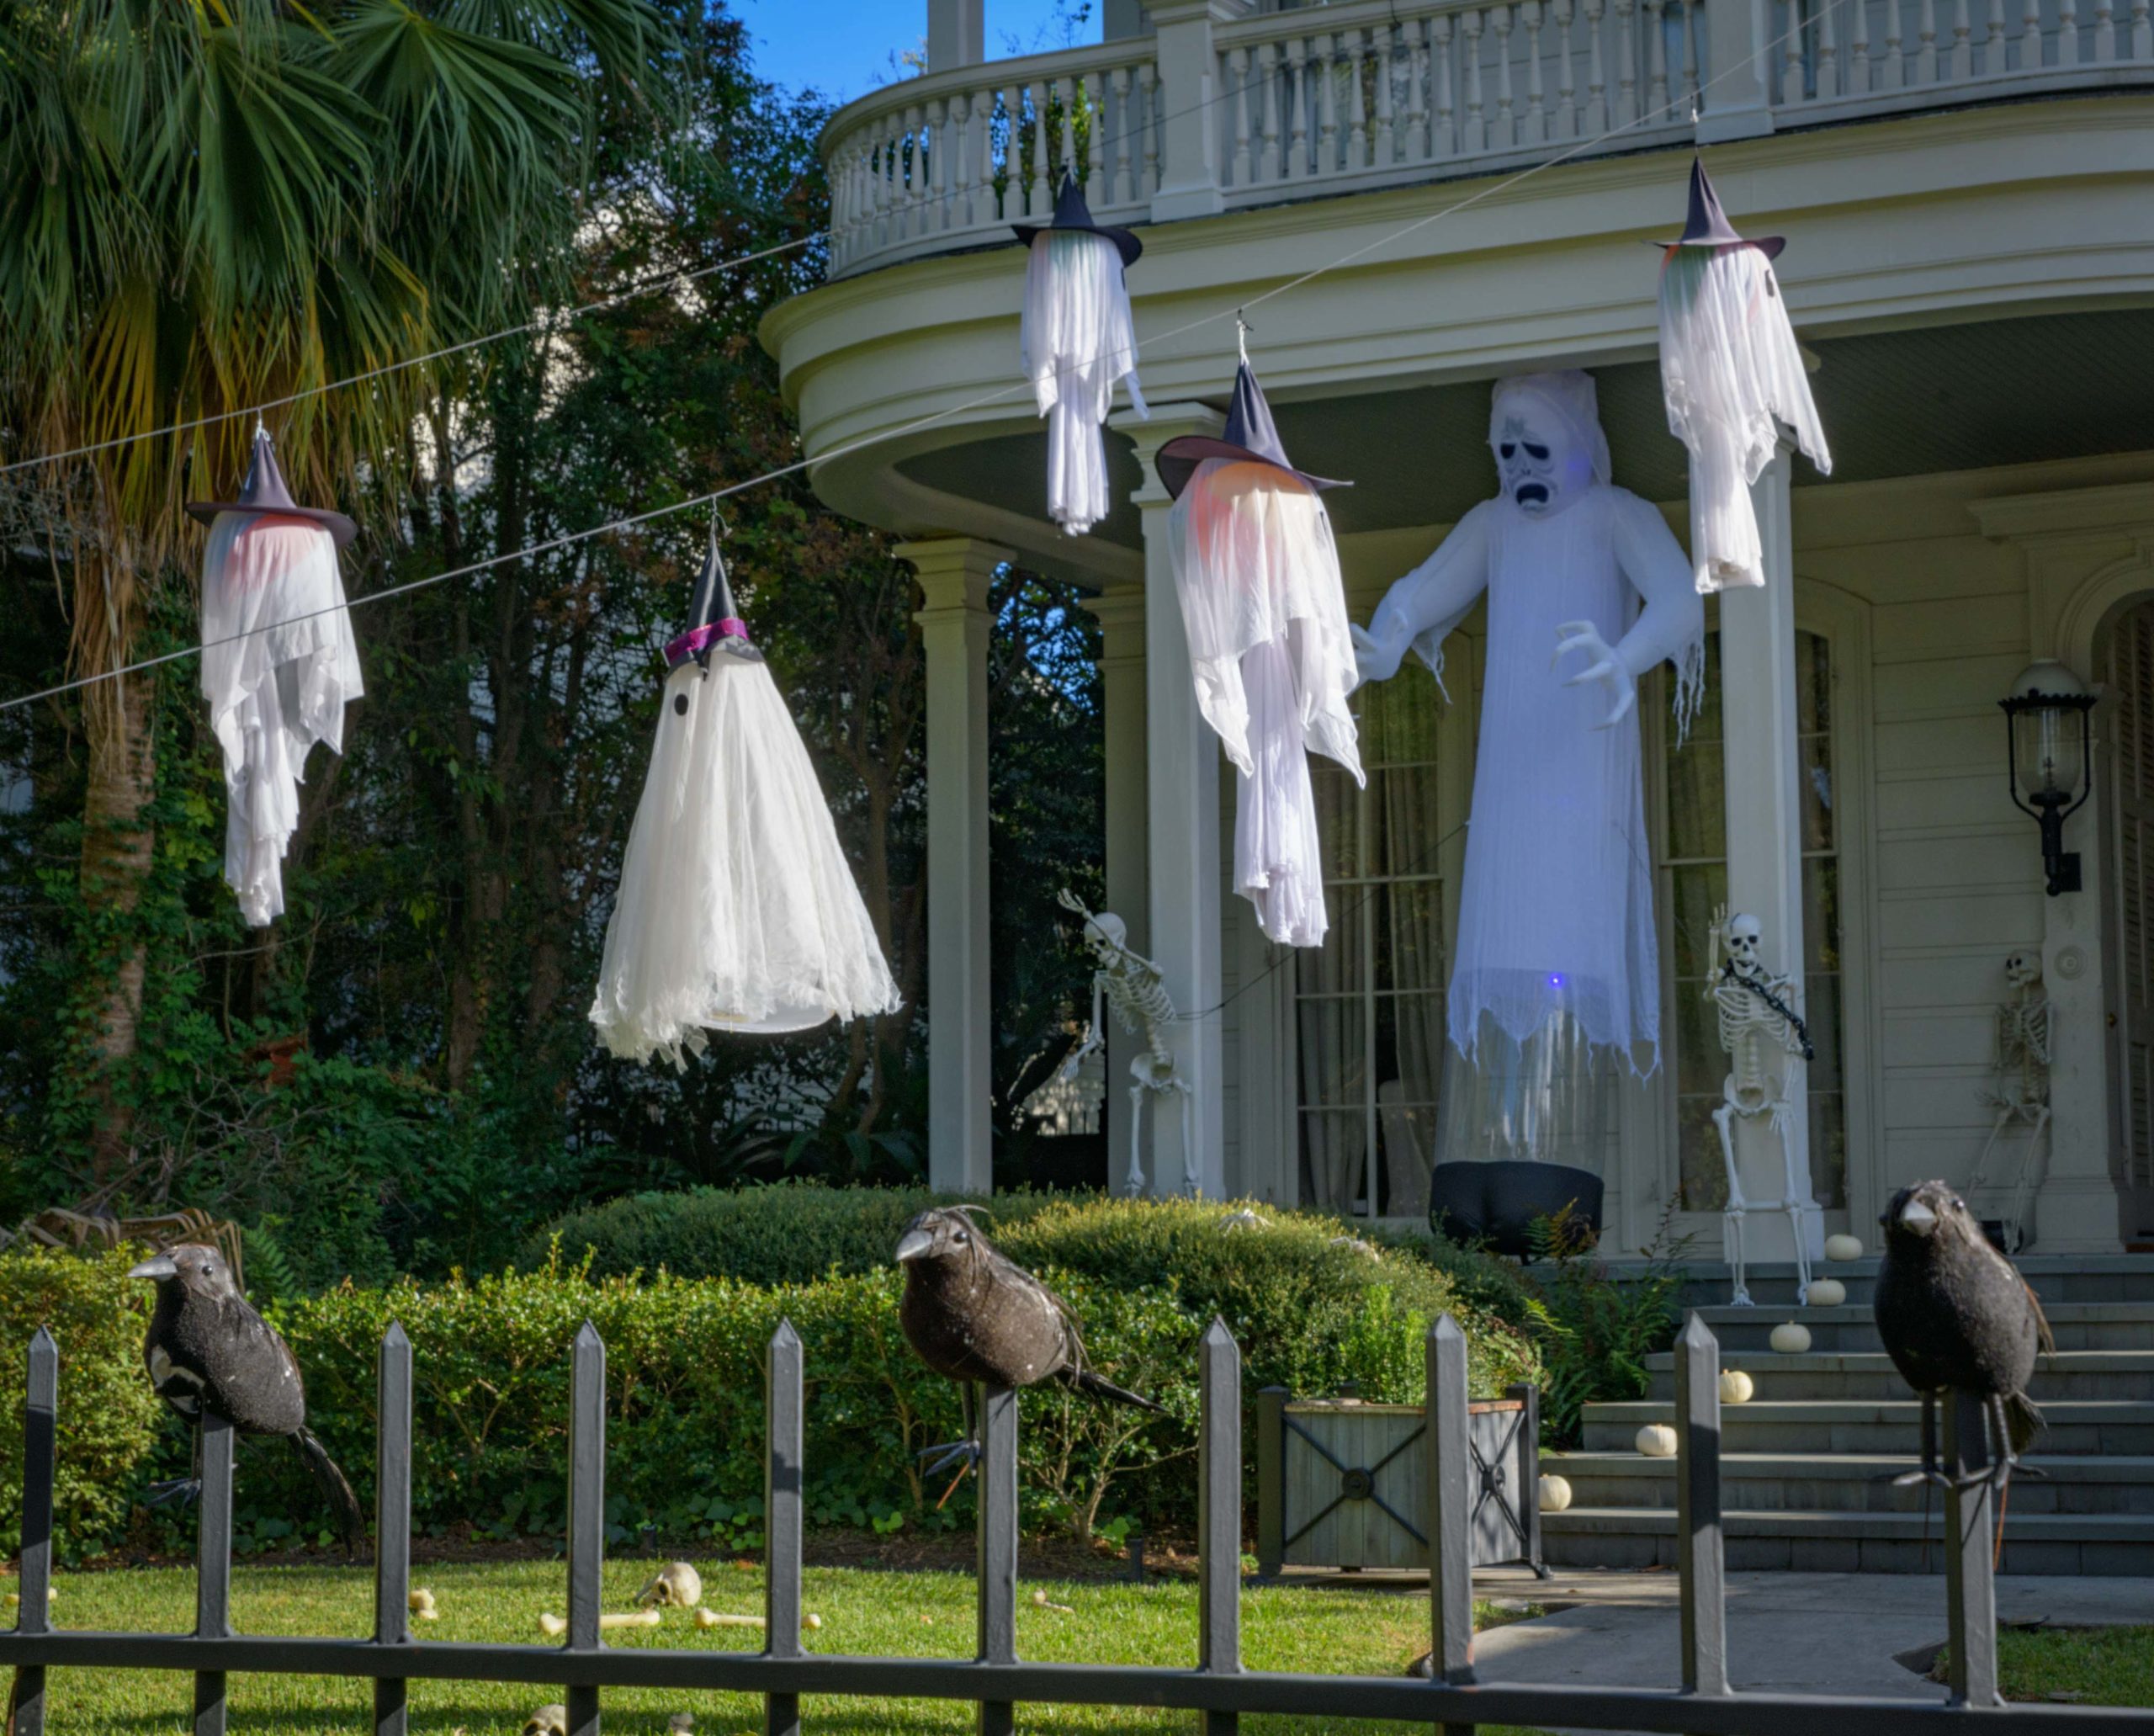 A home on St. Charles Ave. has many ghosts taking flight while crows hang out on the fence. Photo by Matthew Hinton